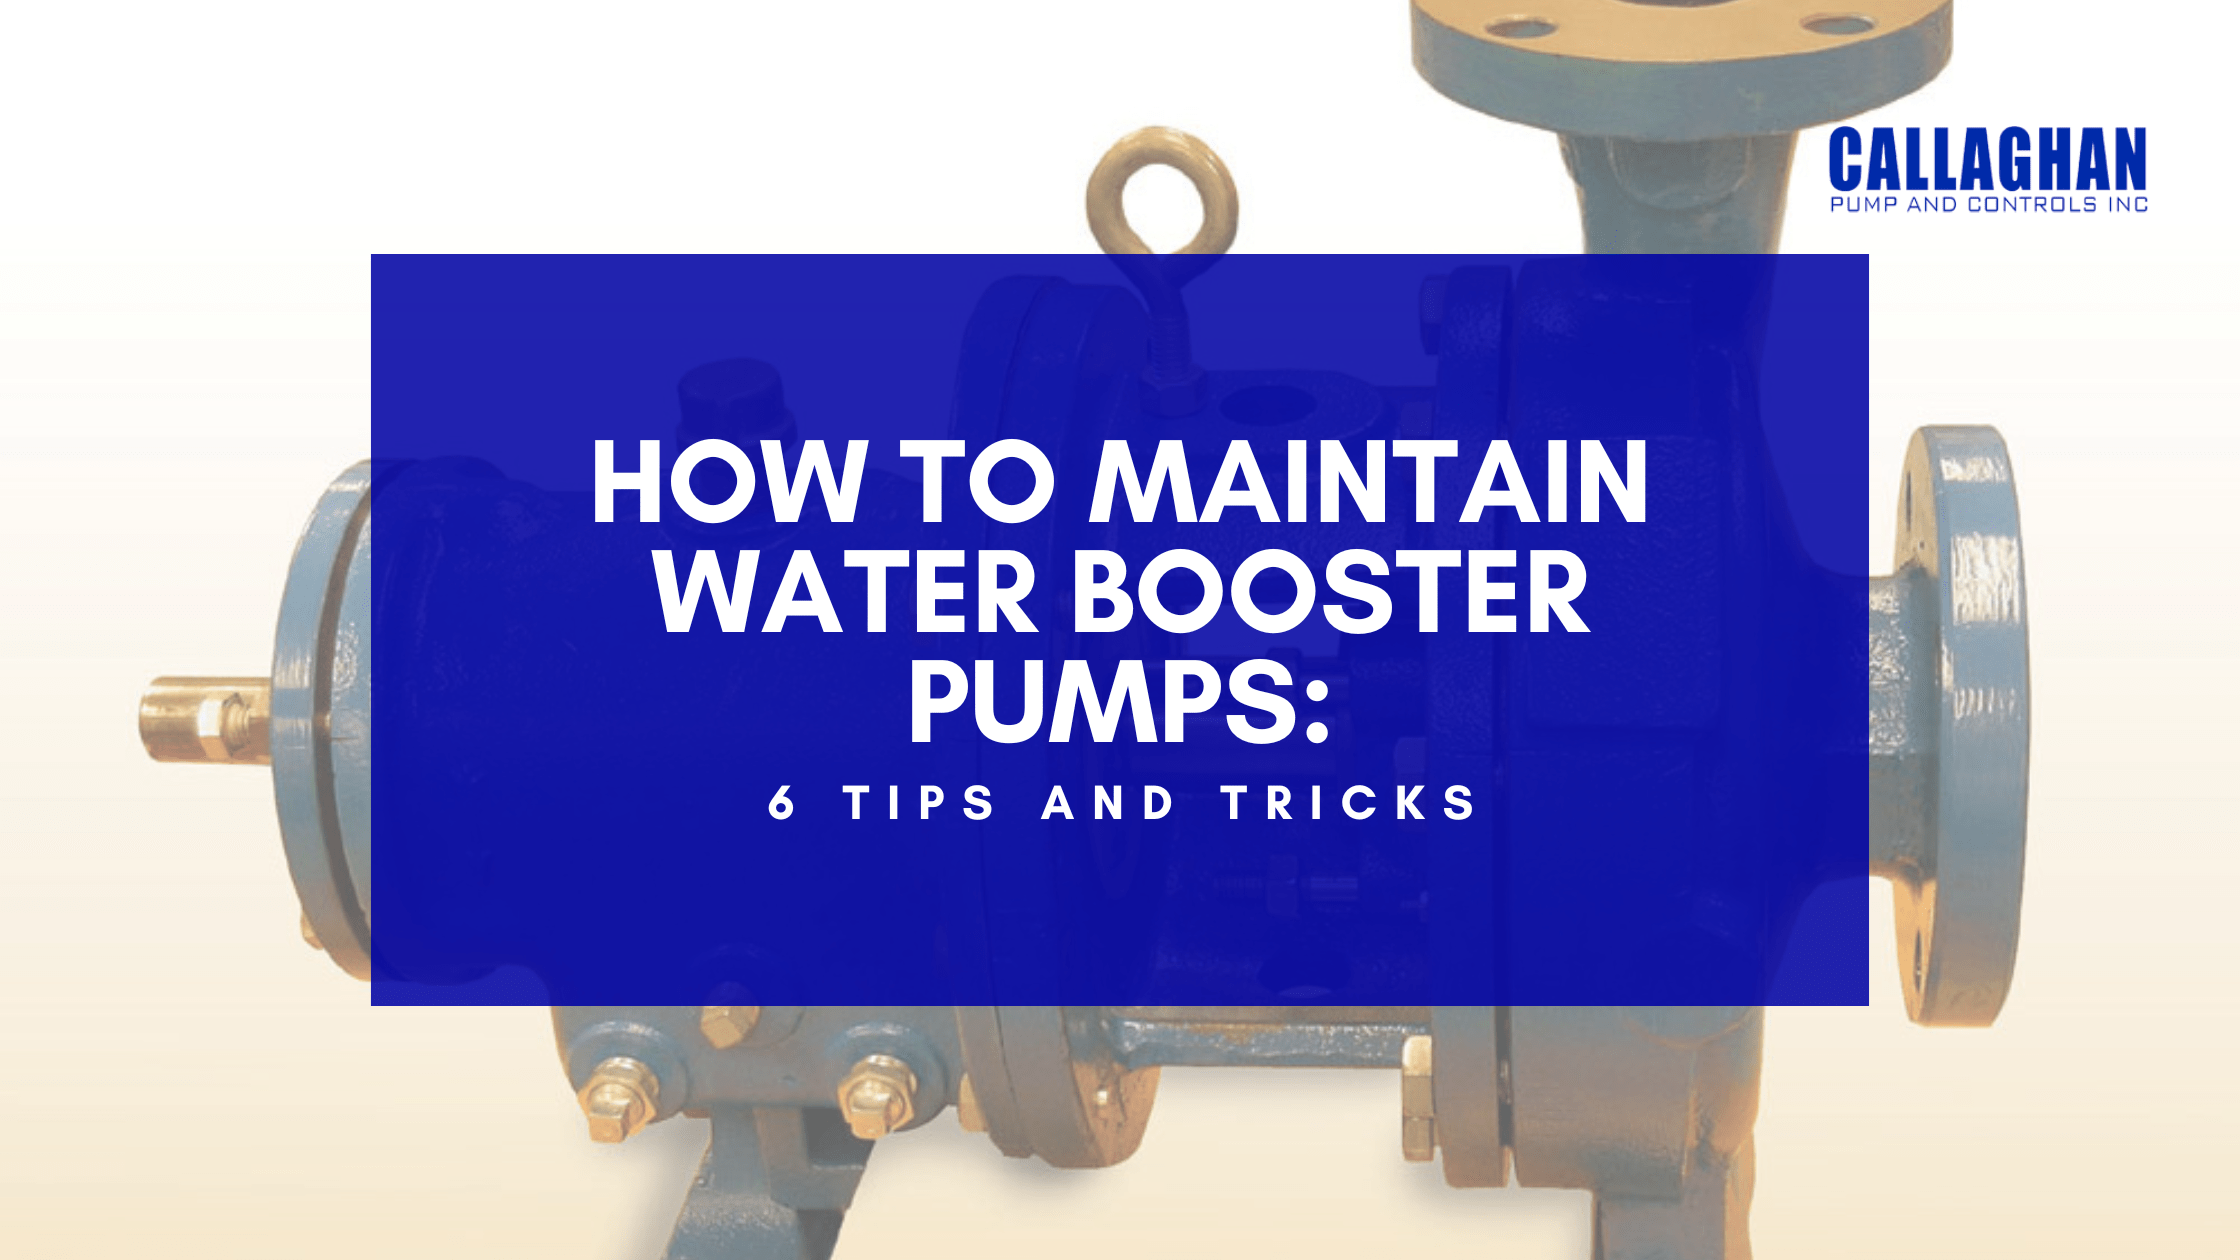 How to Maintain Water Booster Pumps: 6 Tips and Tricks